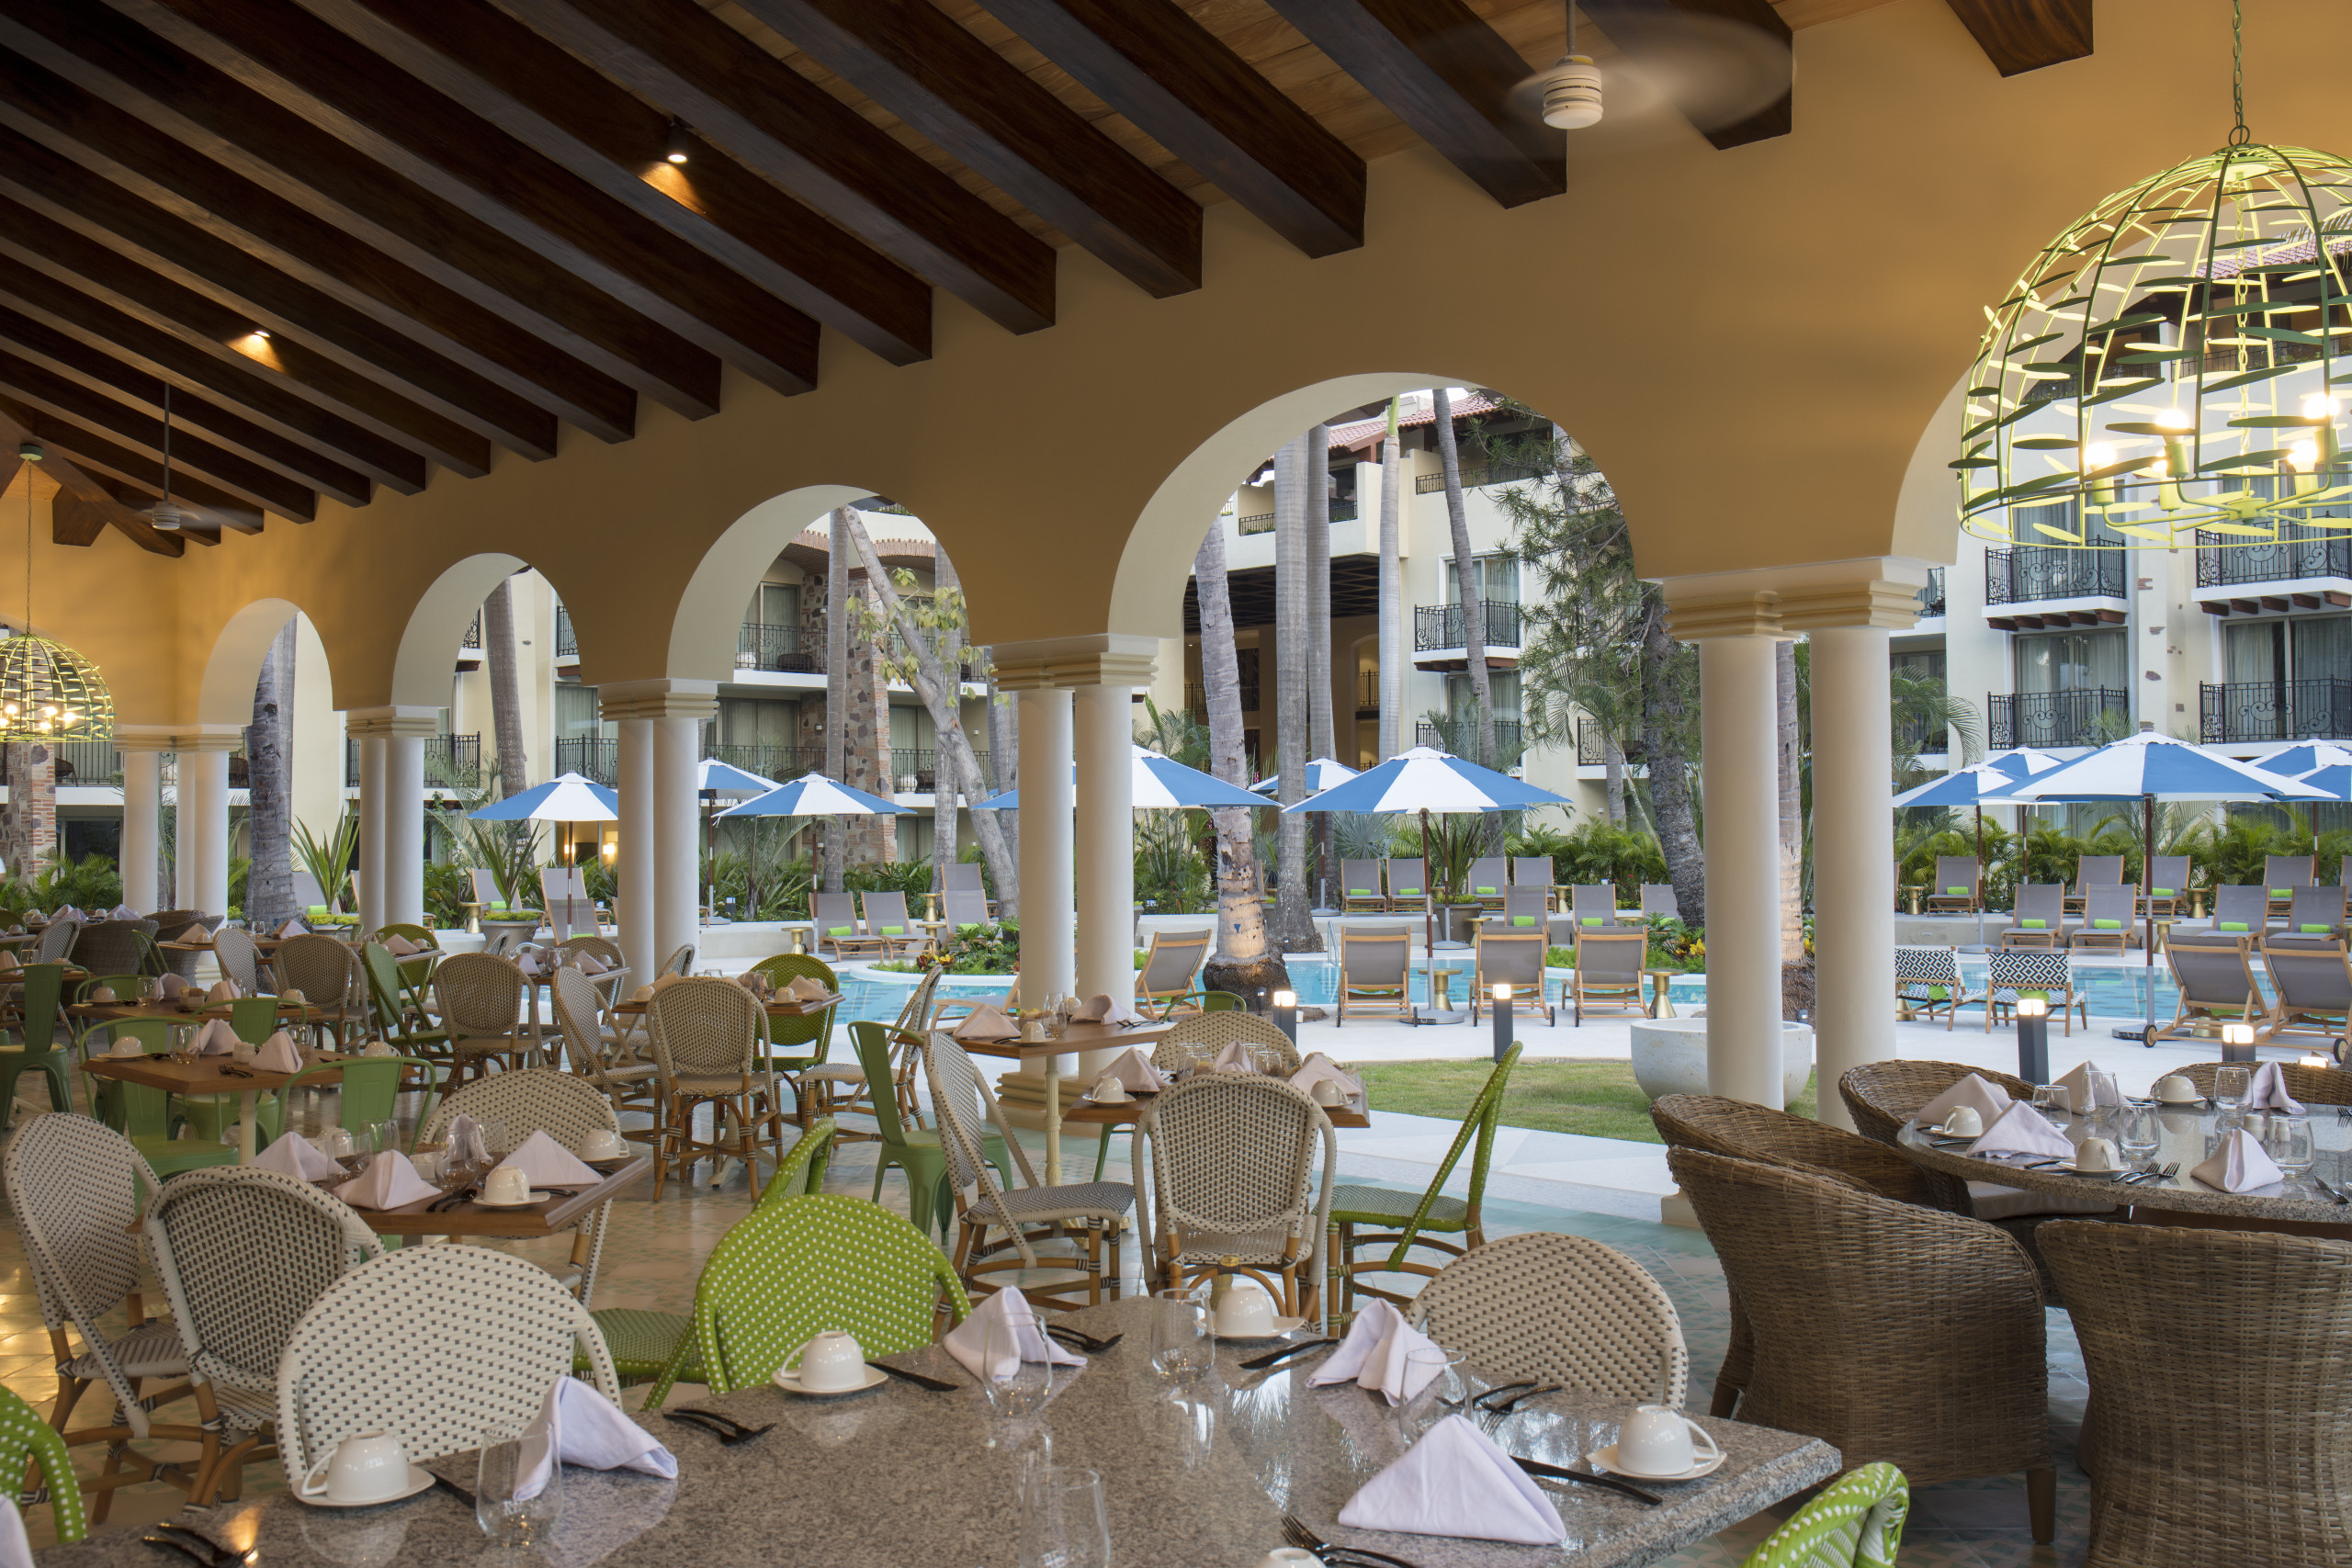 Talavera Restaurant seating with view of pool